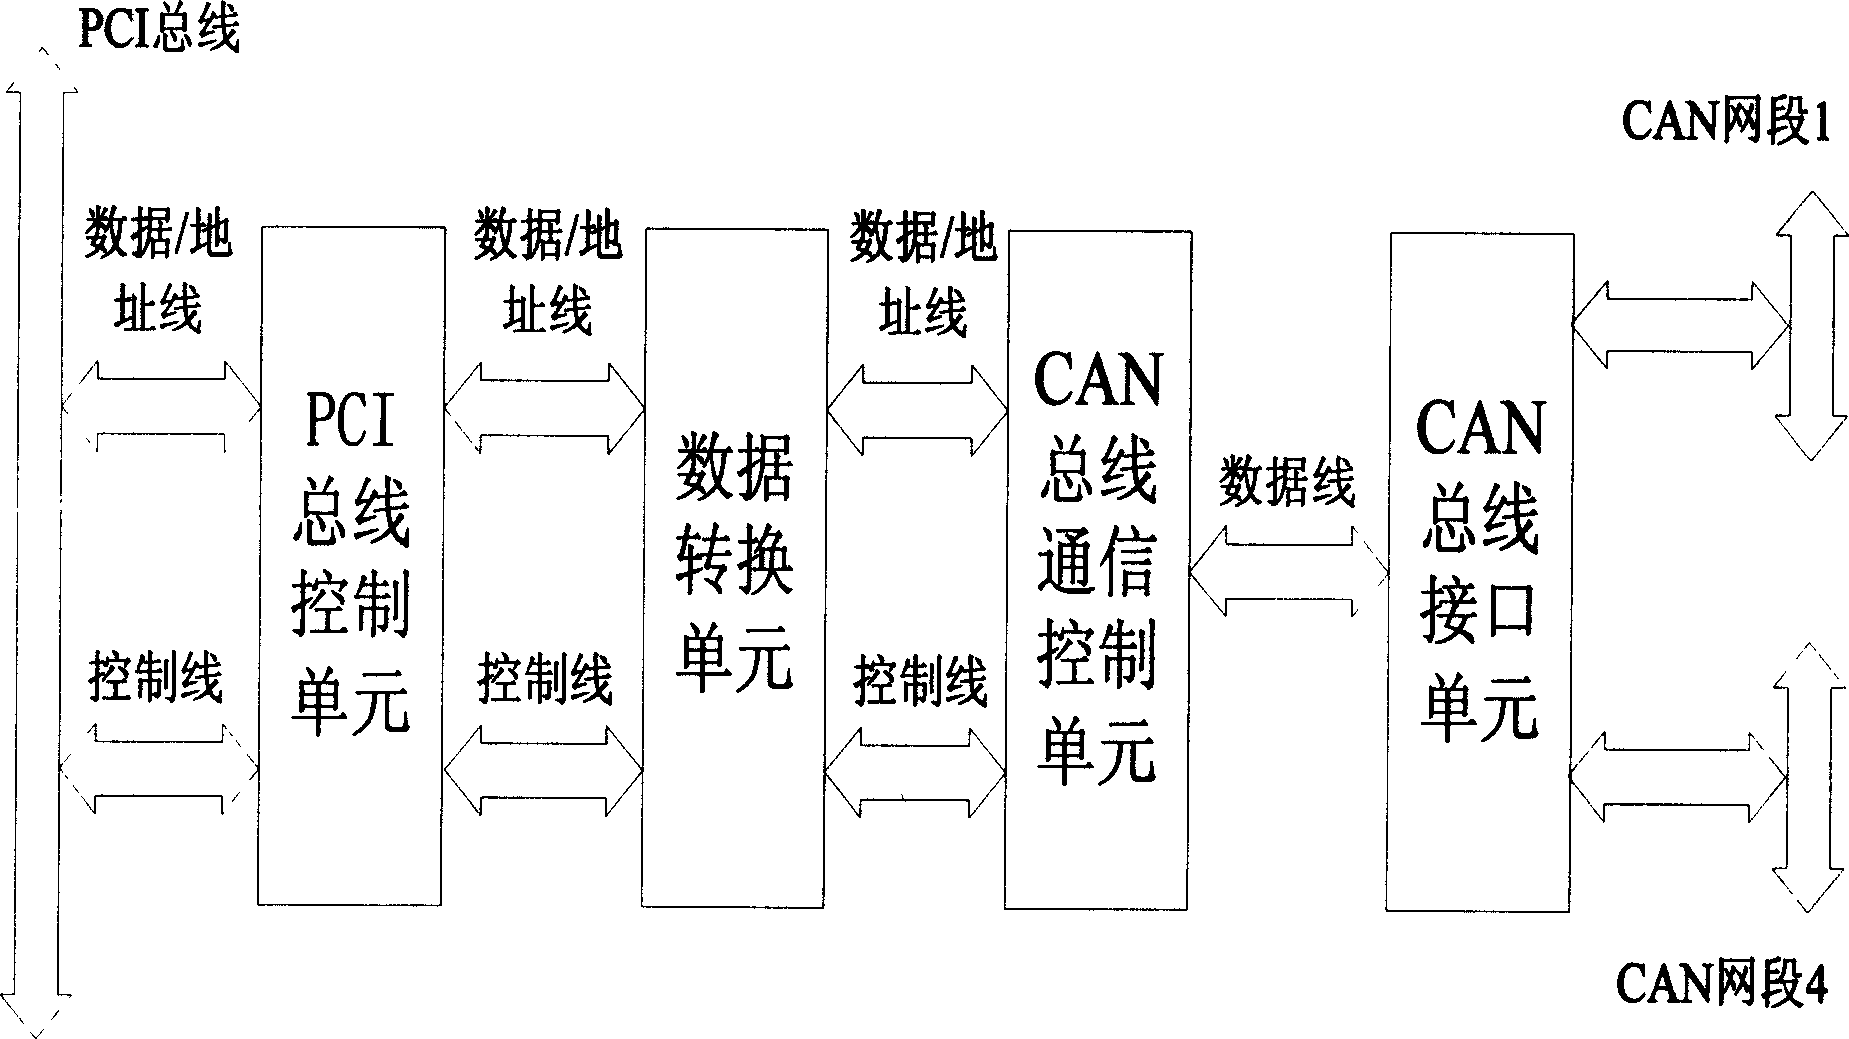 Intelligent management apparatus and management method for distributed control network based on CAN bus